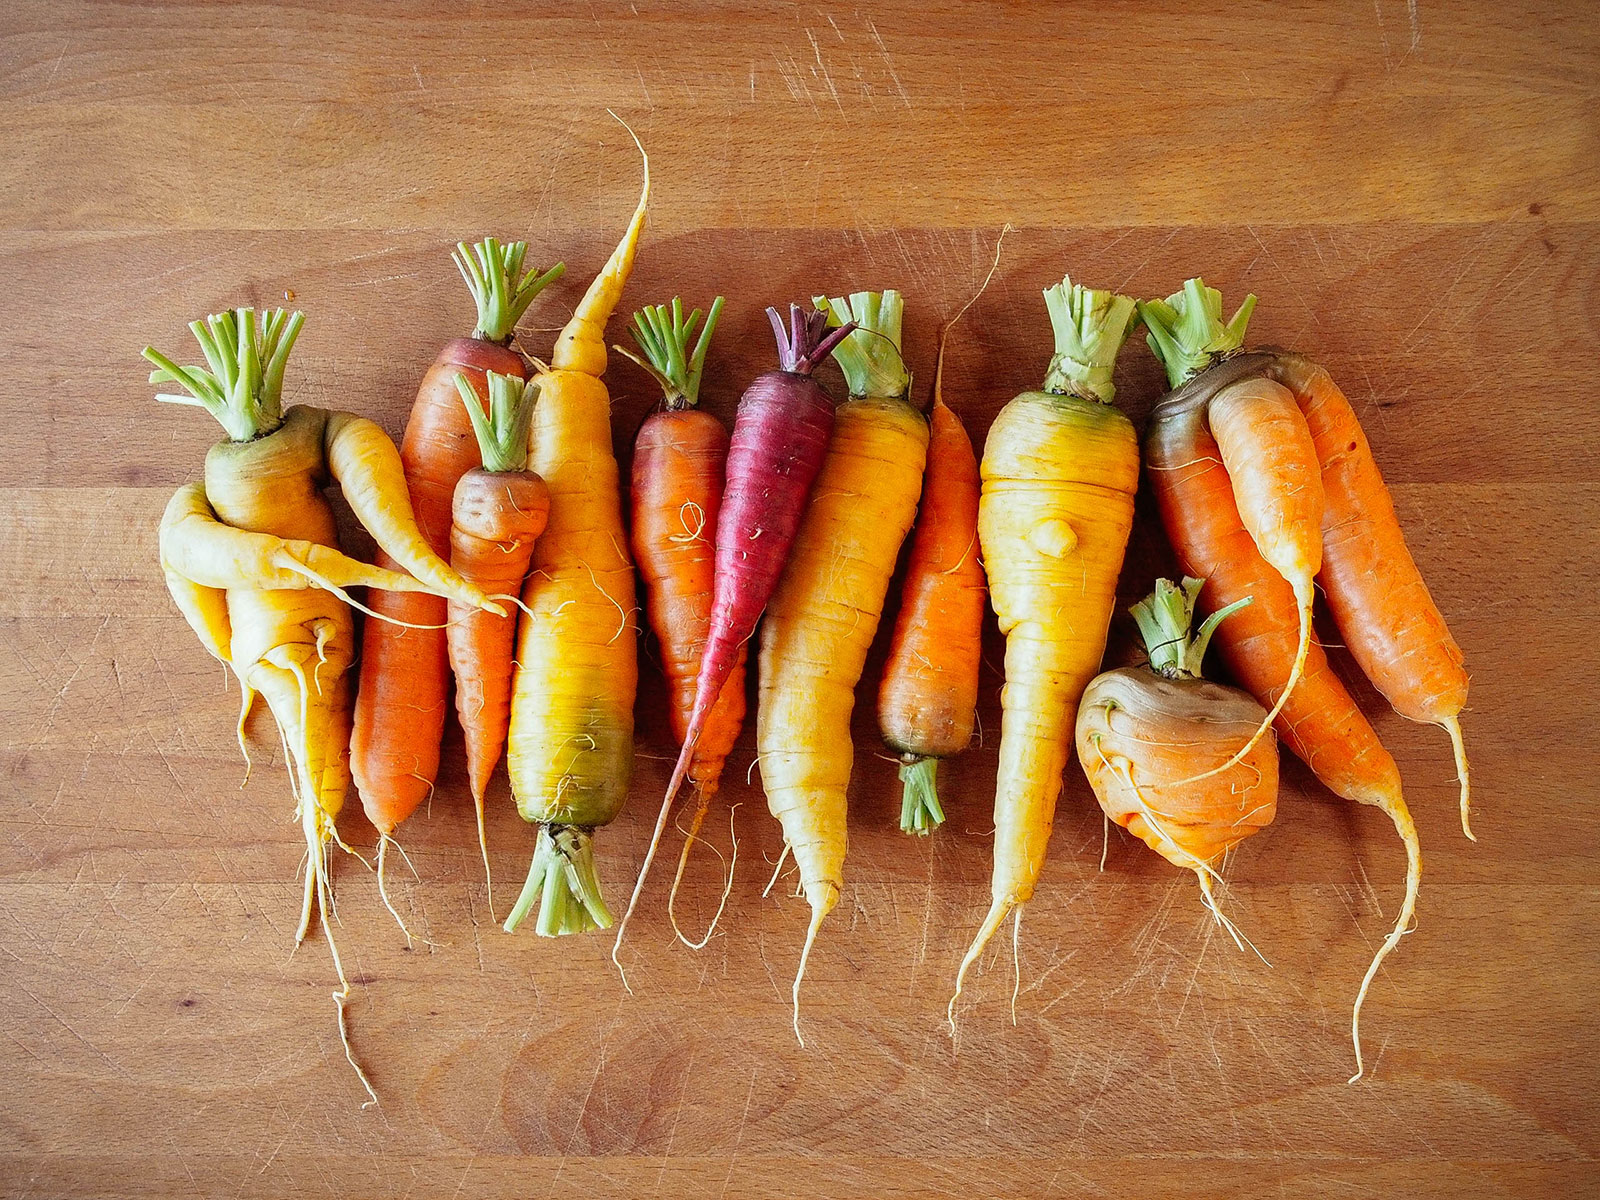 A group of colorful yellow, orange, and purple carrots of all shapes and sizes (some with forked roots) on a wooden cutting board